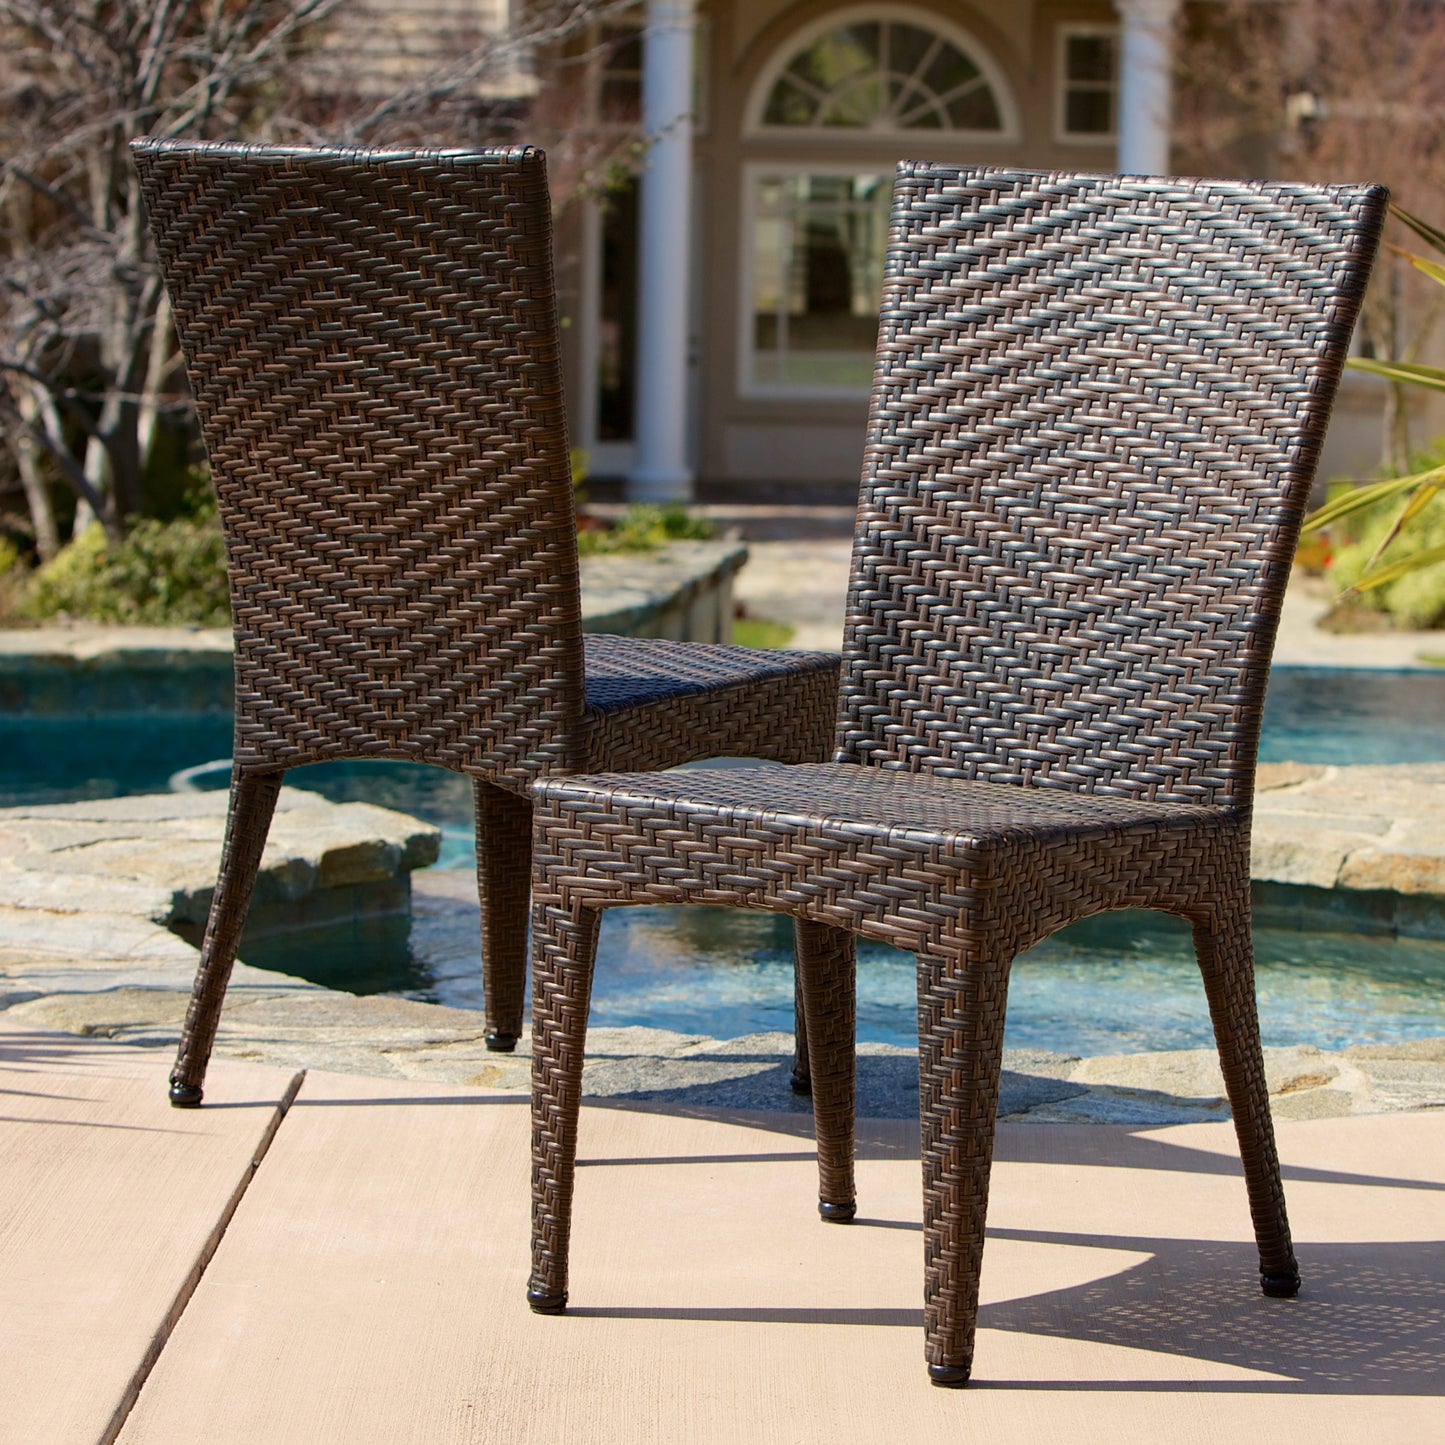 Solana Outdoor Wicker Chairs (Set of 2)